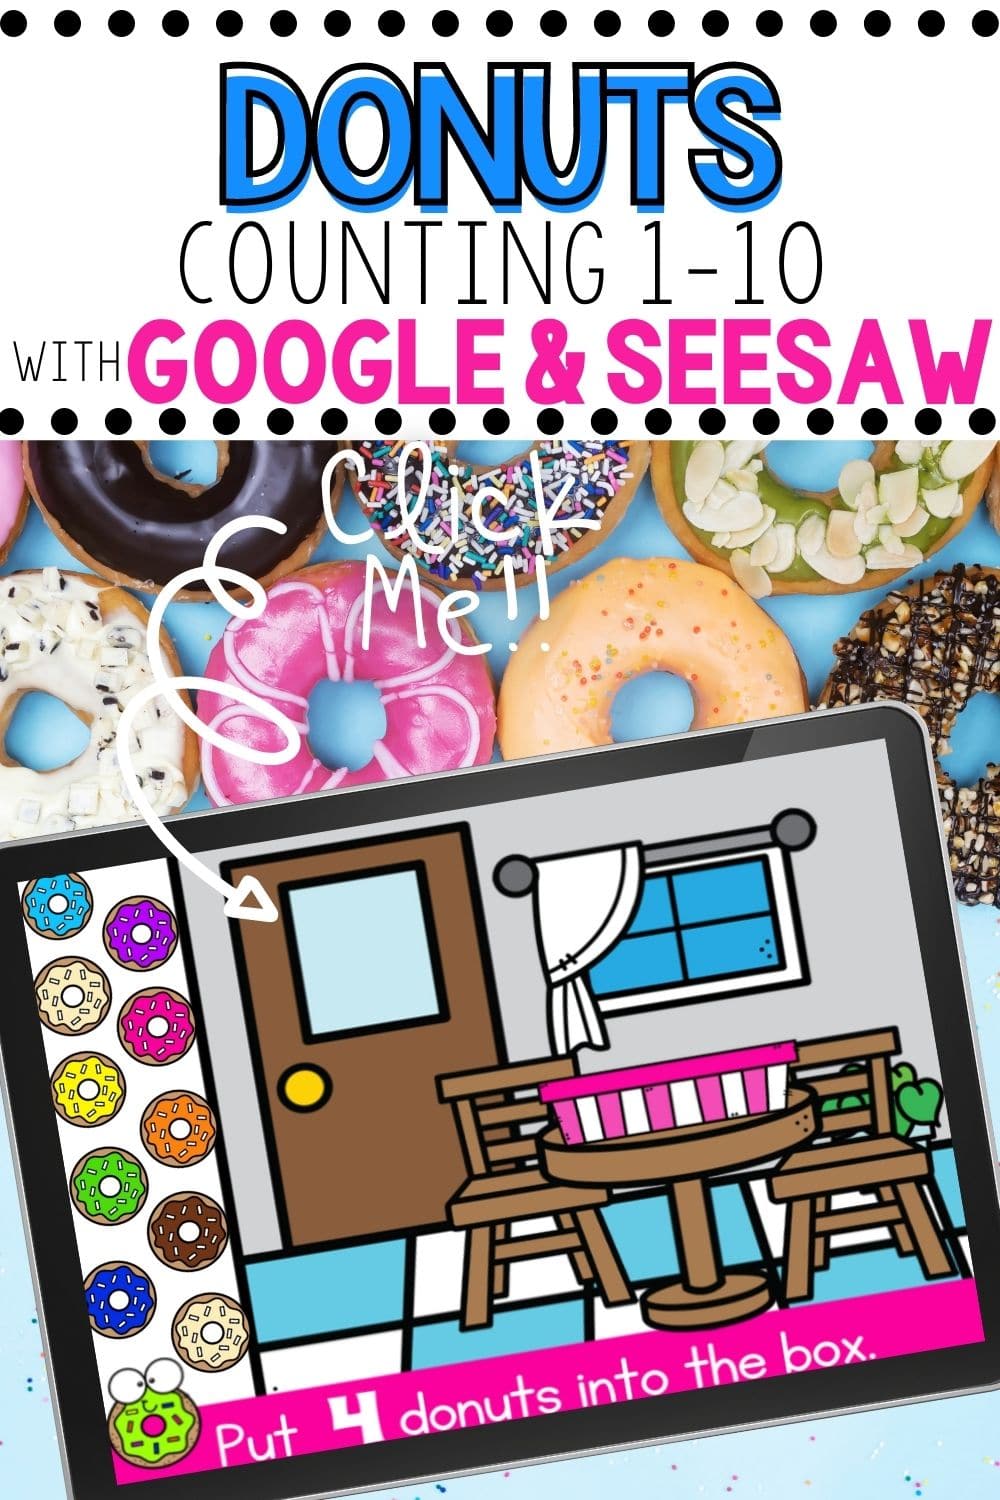 Donuts Counting 1-10 Activity for Google and Seesaw